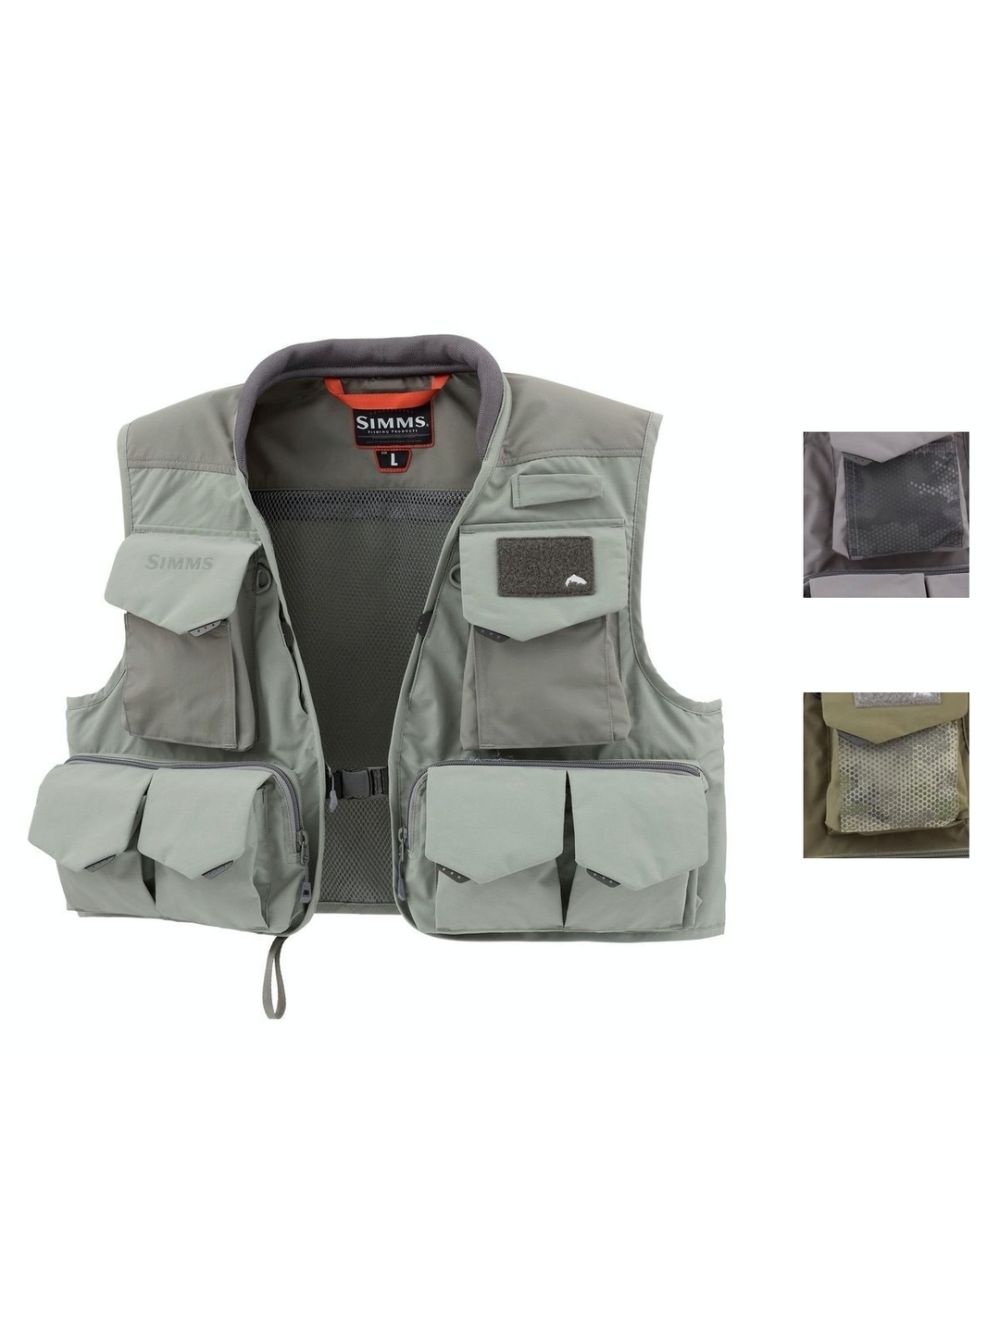 Gorge Fly Shop Blog: Simms Freestone Fishing Vest - New for 2018